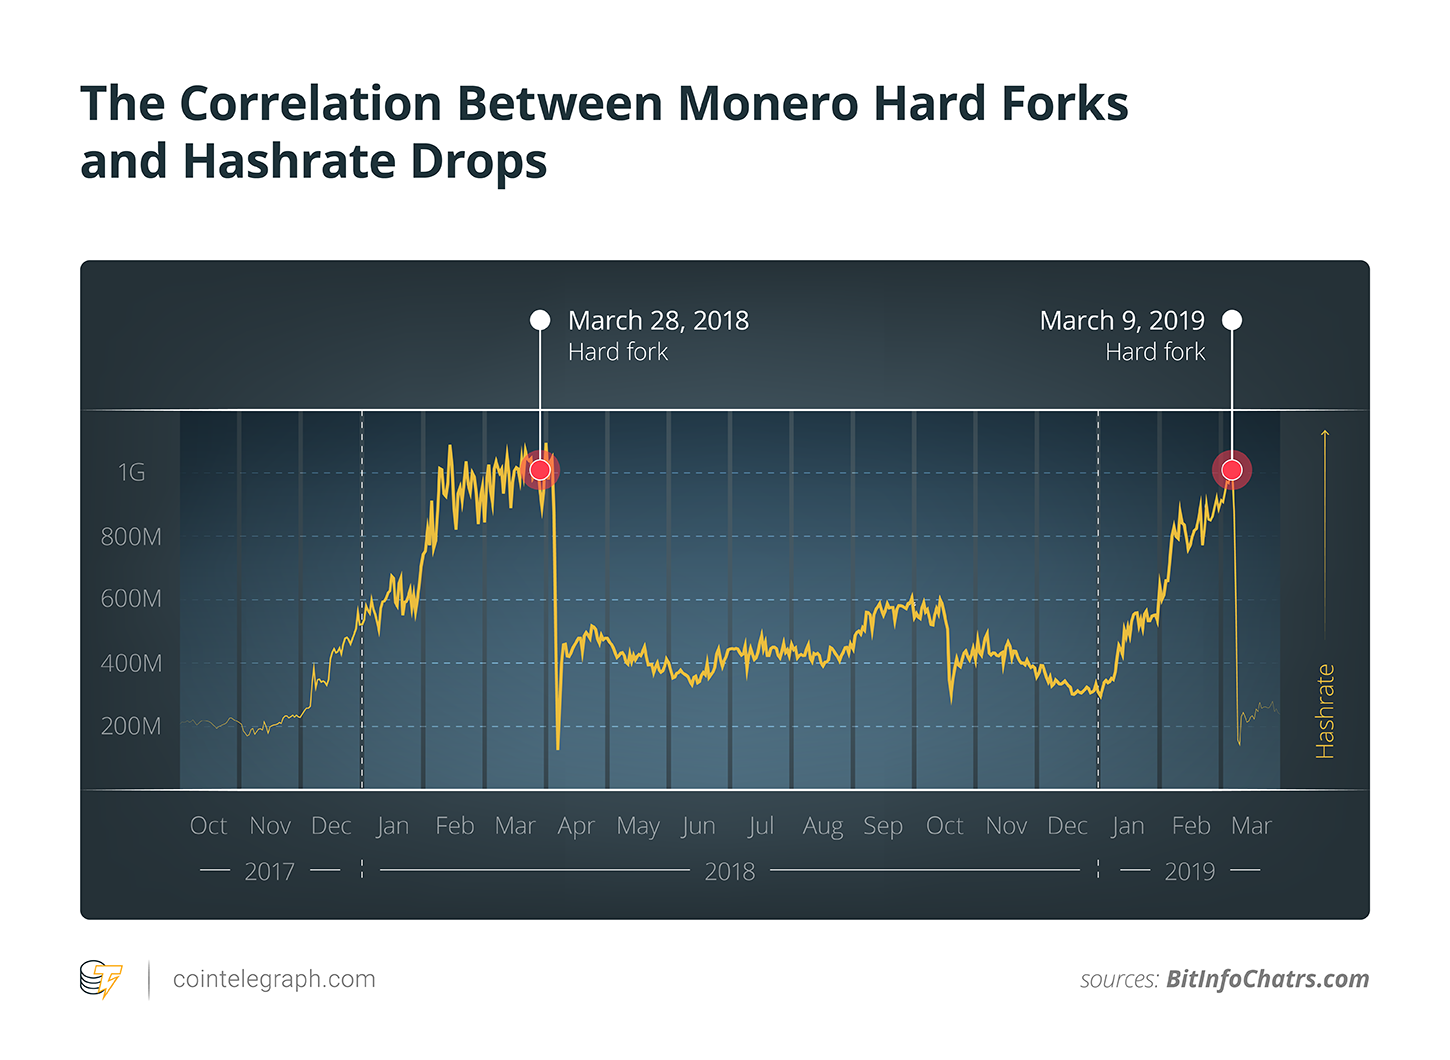 The Correlation Between Monero Hard Forks and Hashrate Drops